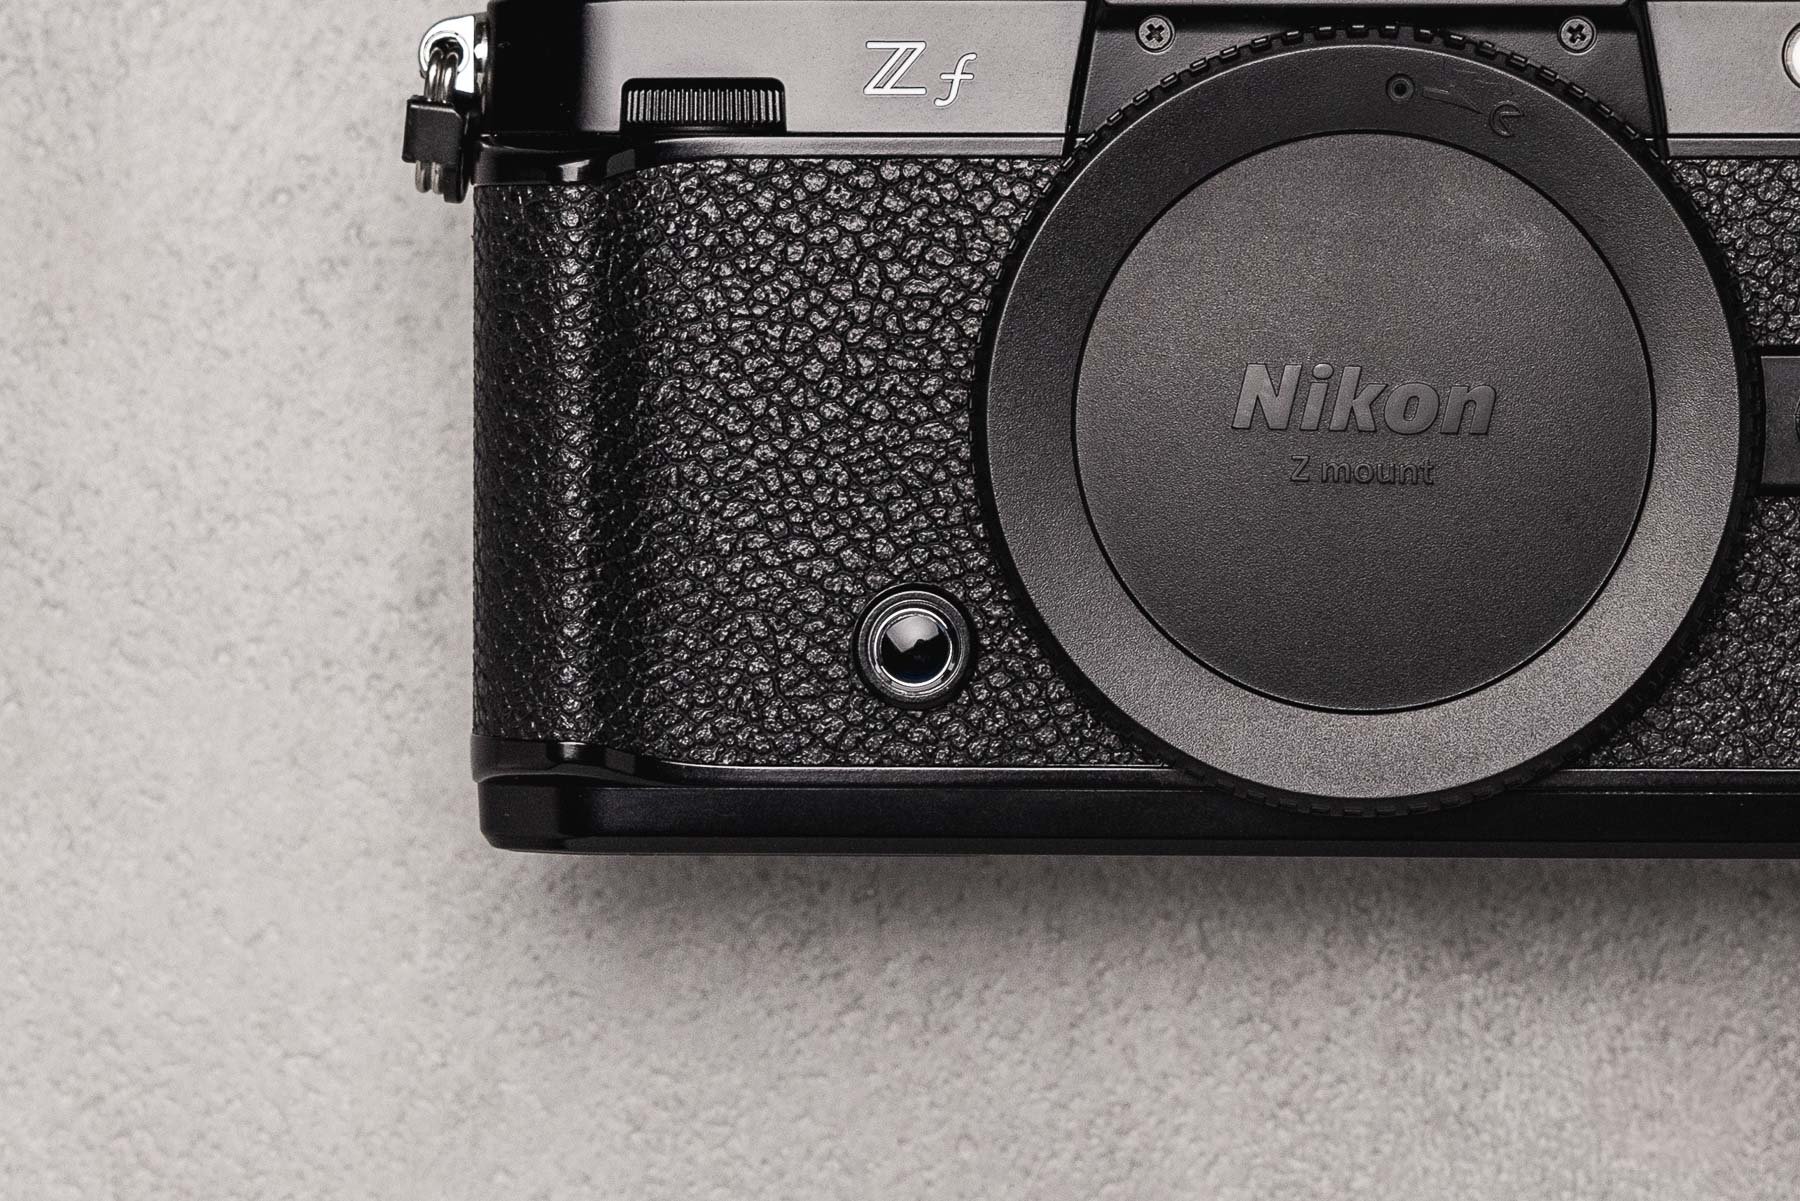 Nikon's new ZF is a retro-styled full-frame camera aimed right at